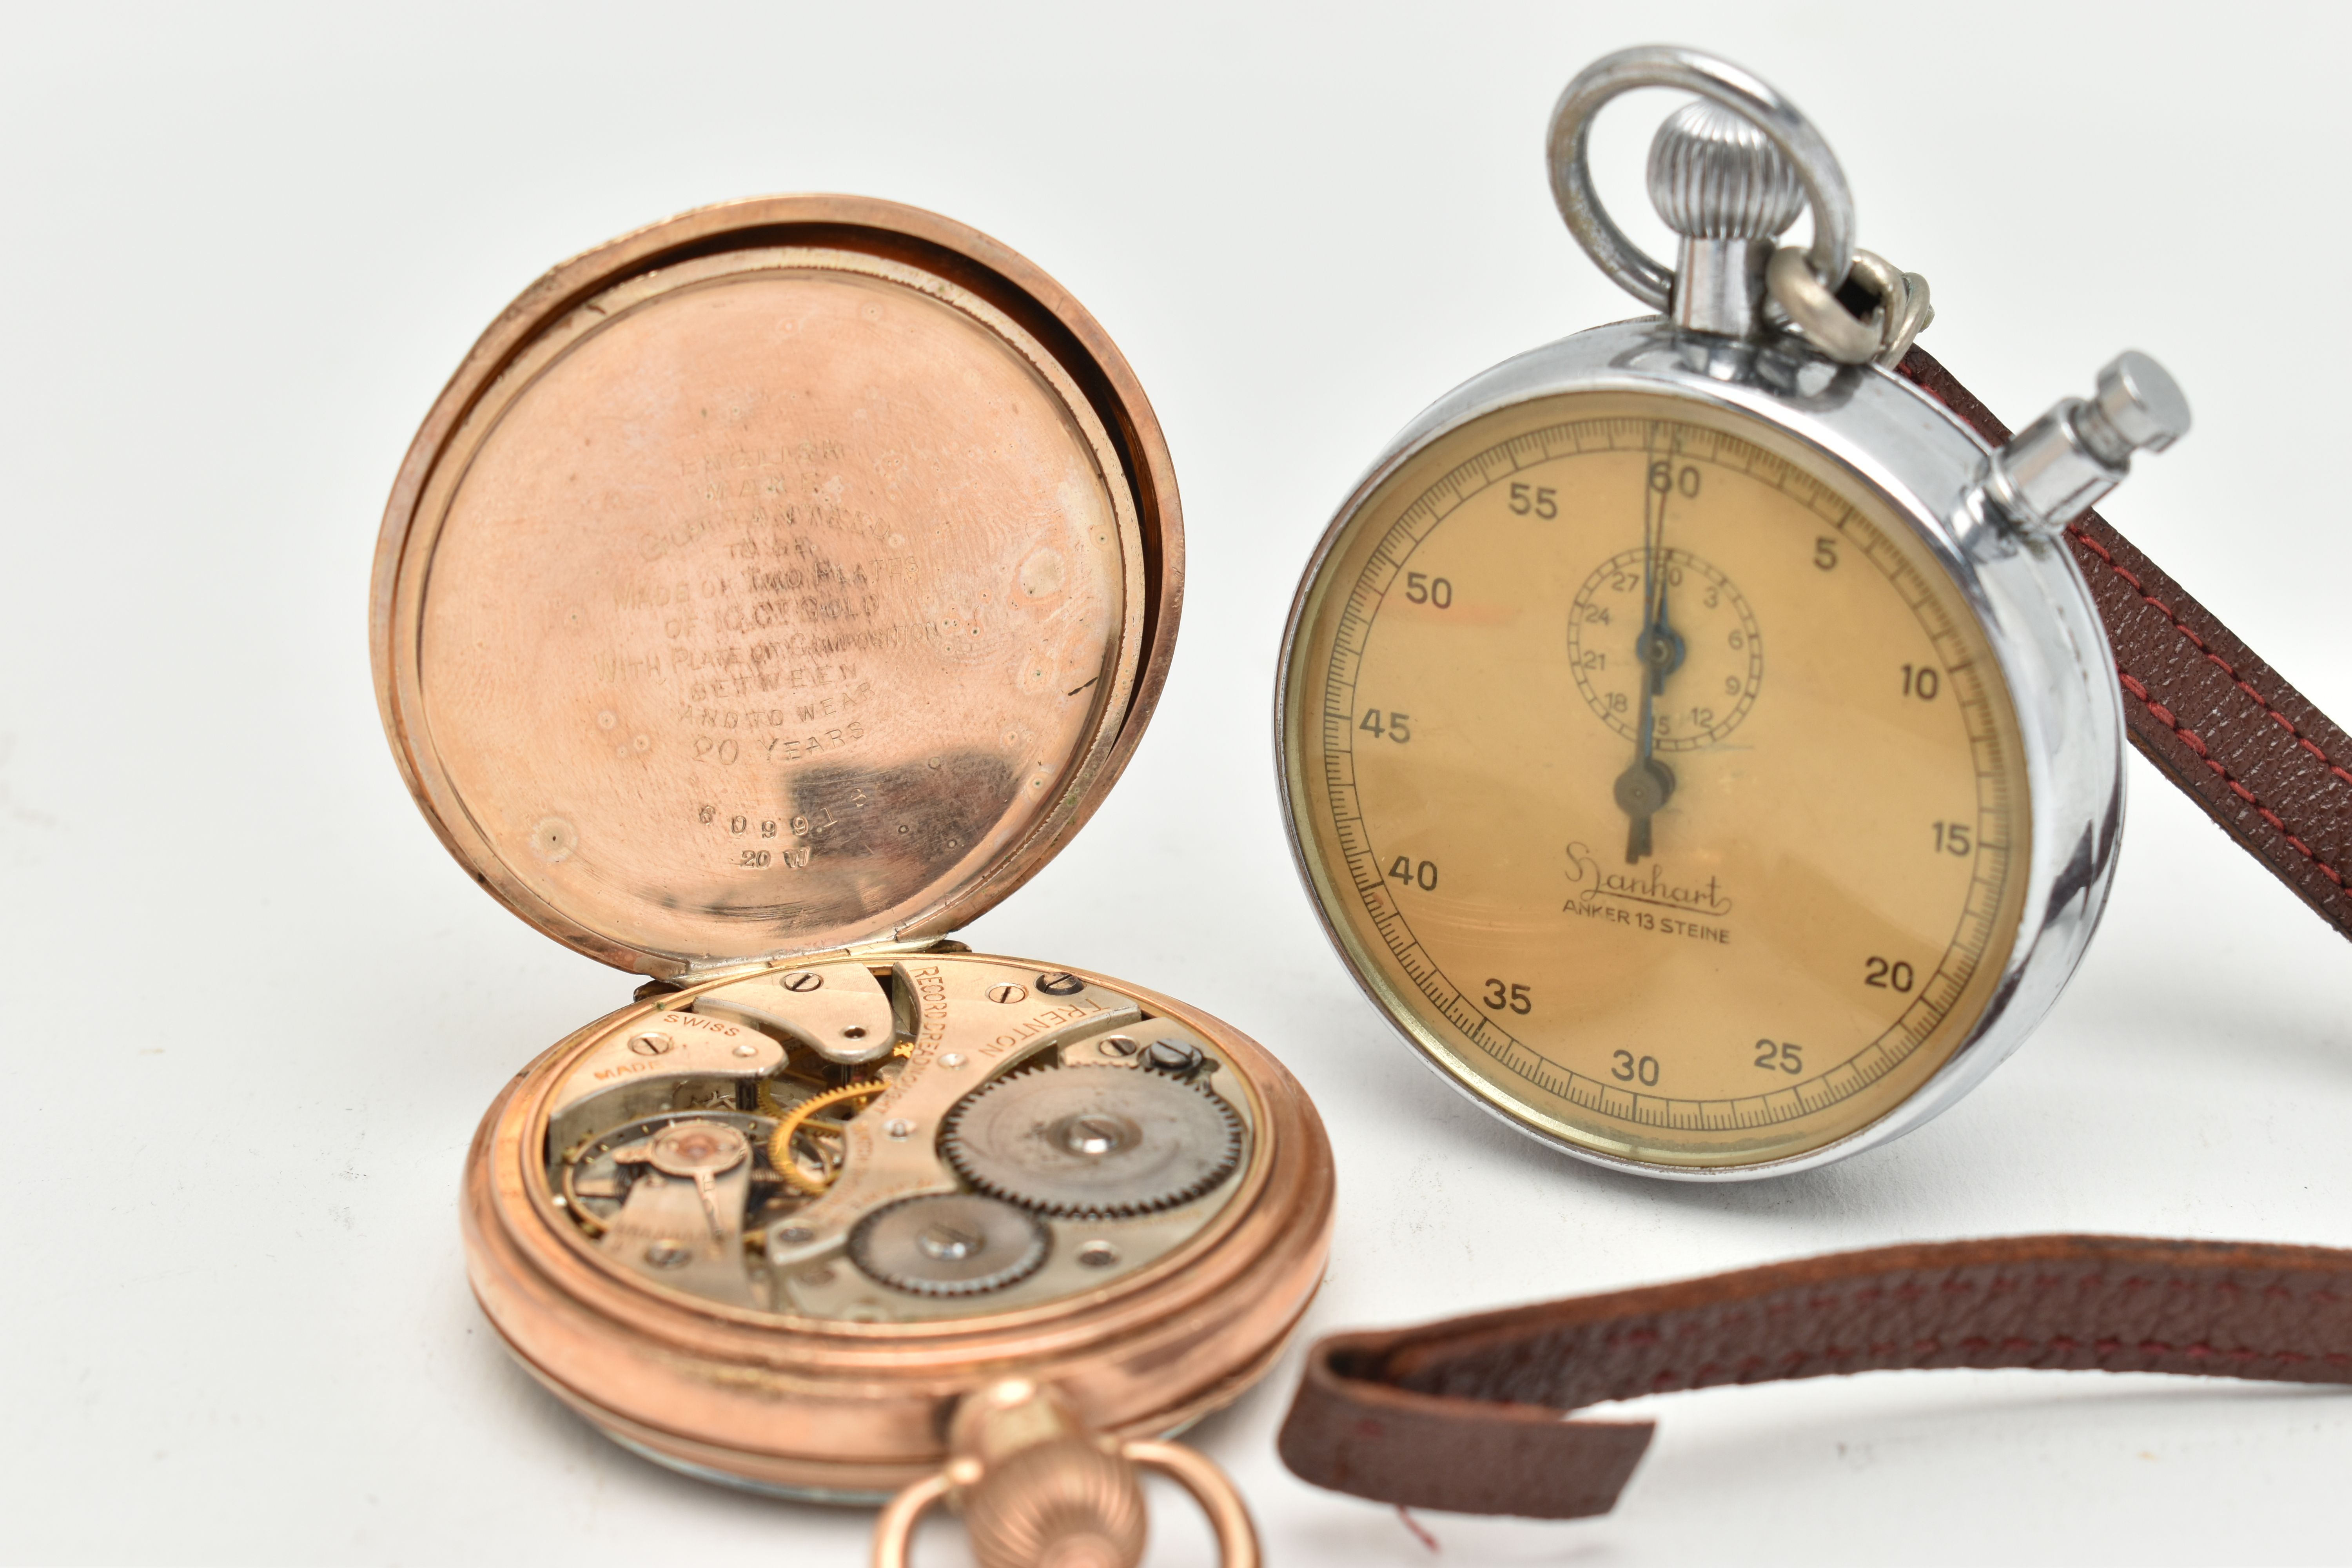 A ROLLED GOLD OPEN FACE POCKET WATCH AND A STOP WATCH, manual wind pocket watch, round white dial - Image 4 of 4